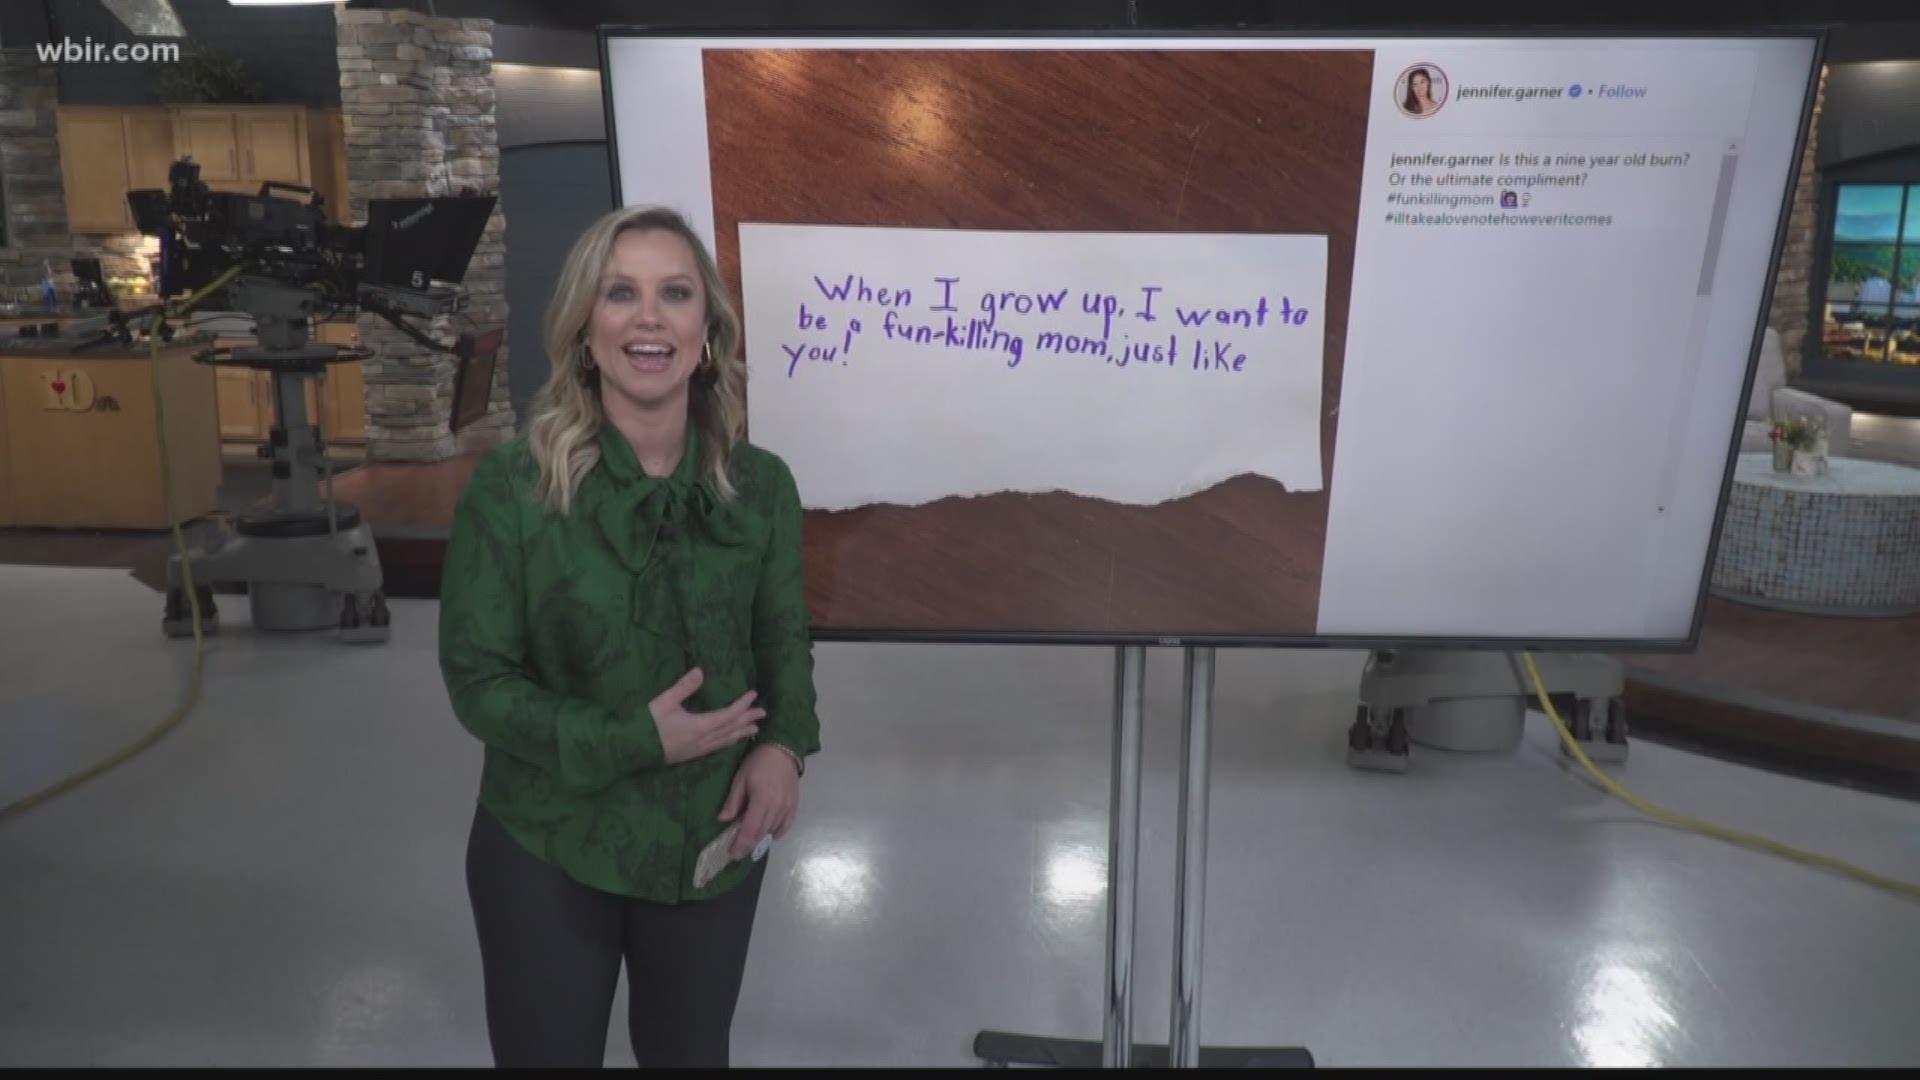 10News Anchor Abby Ham has some interesting stuff to talk about trending online this morning.